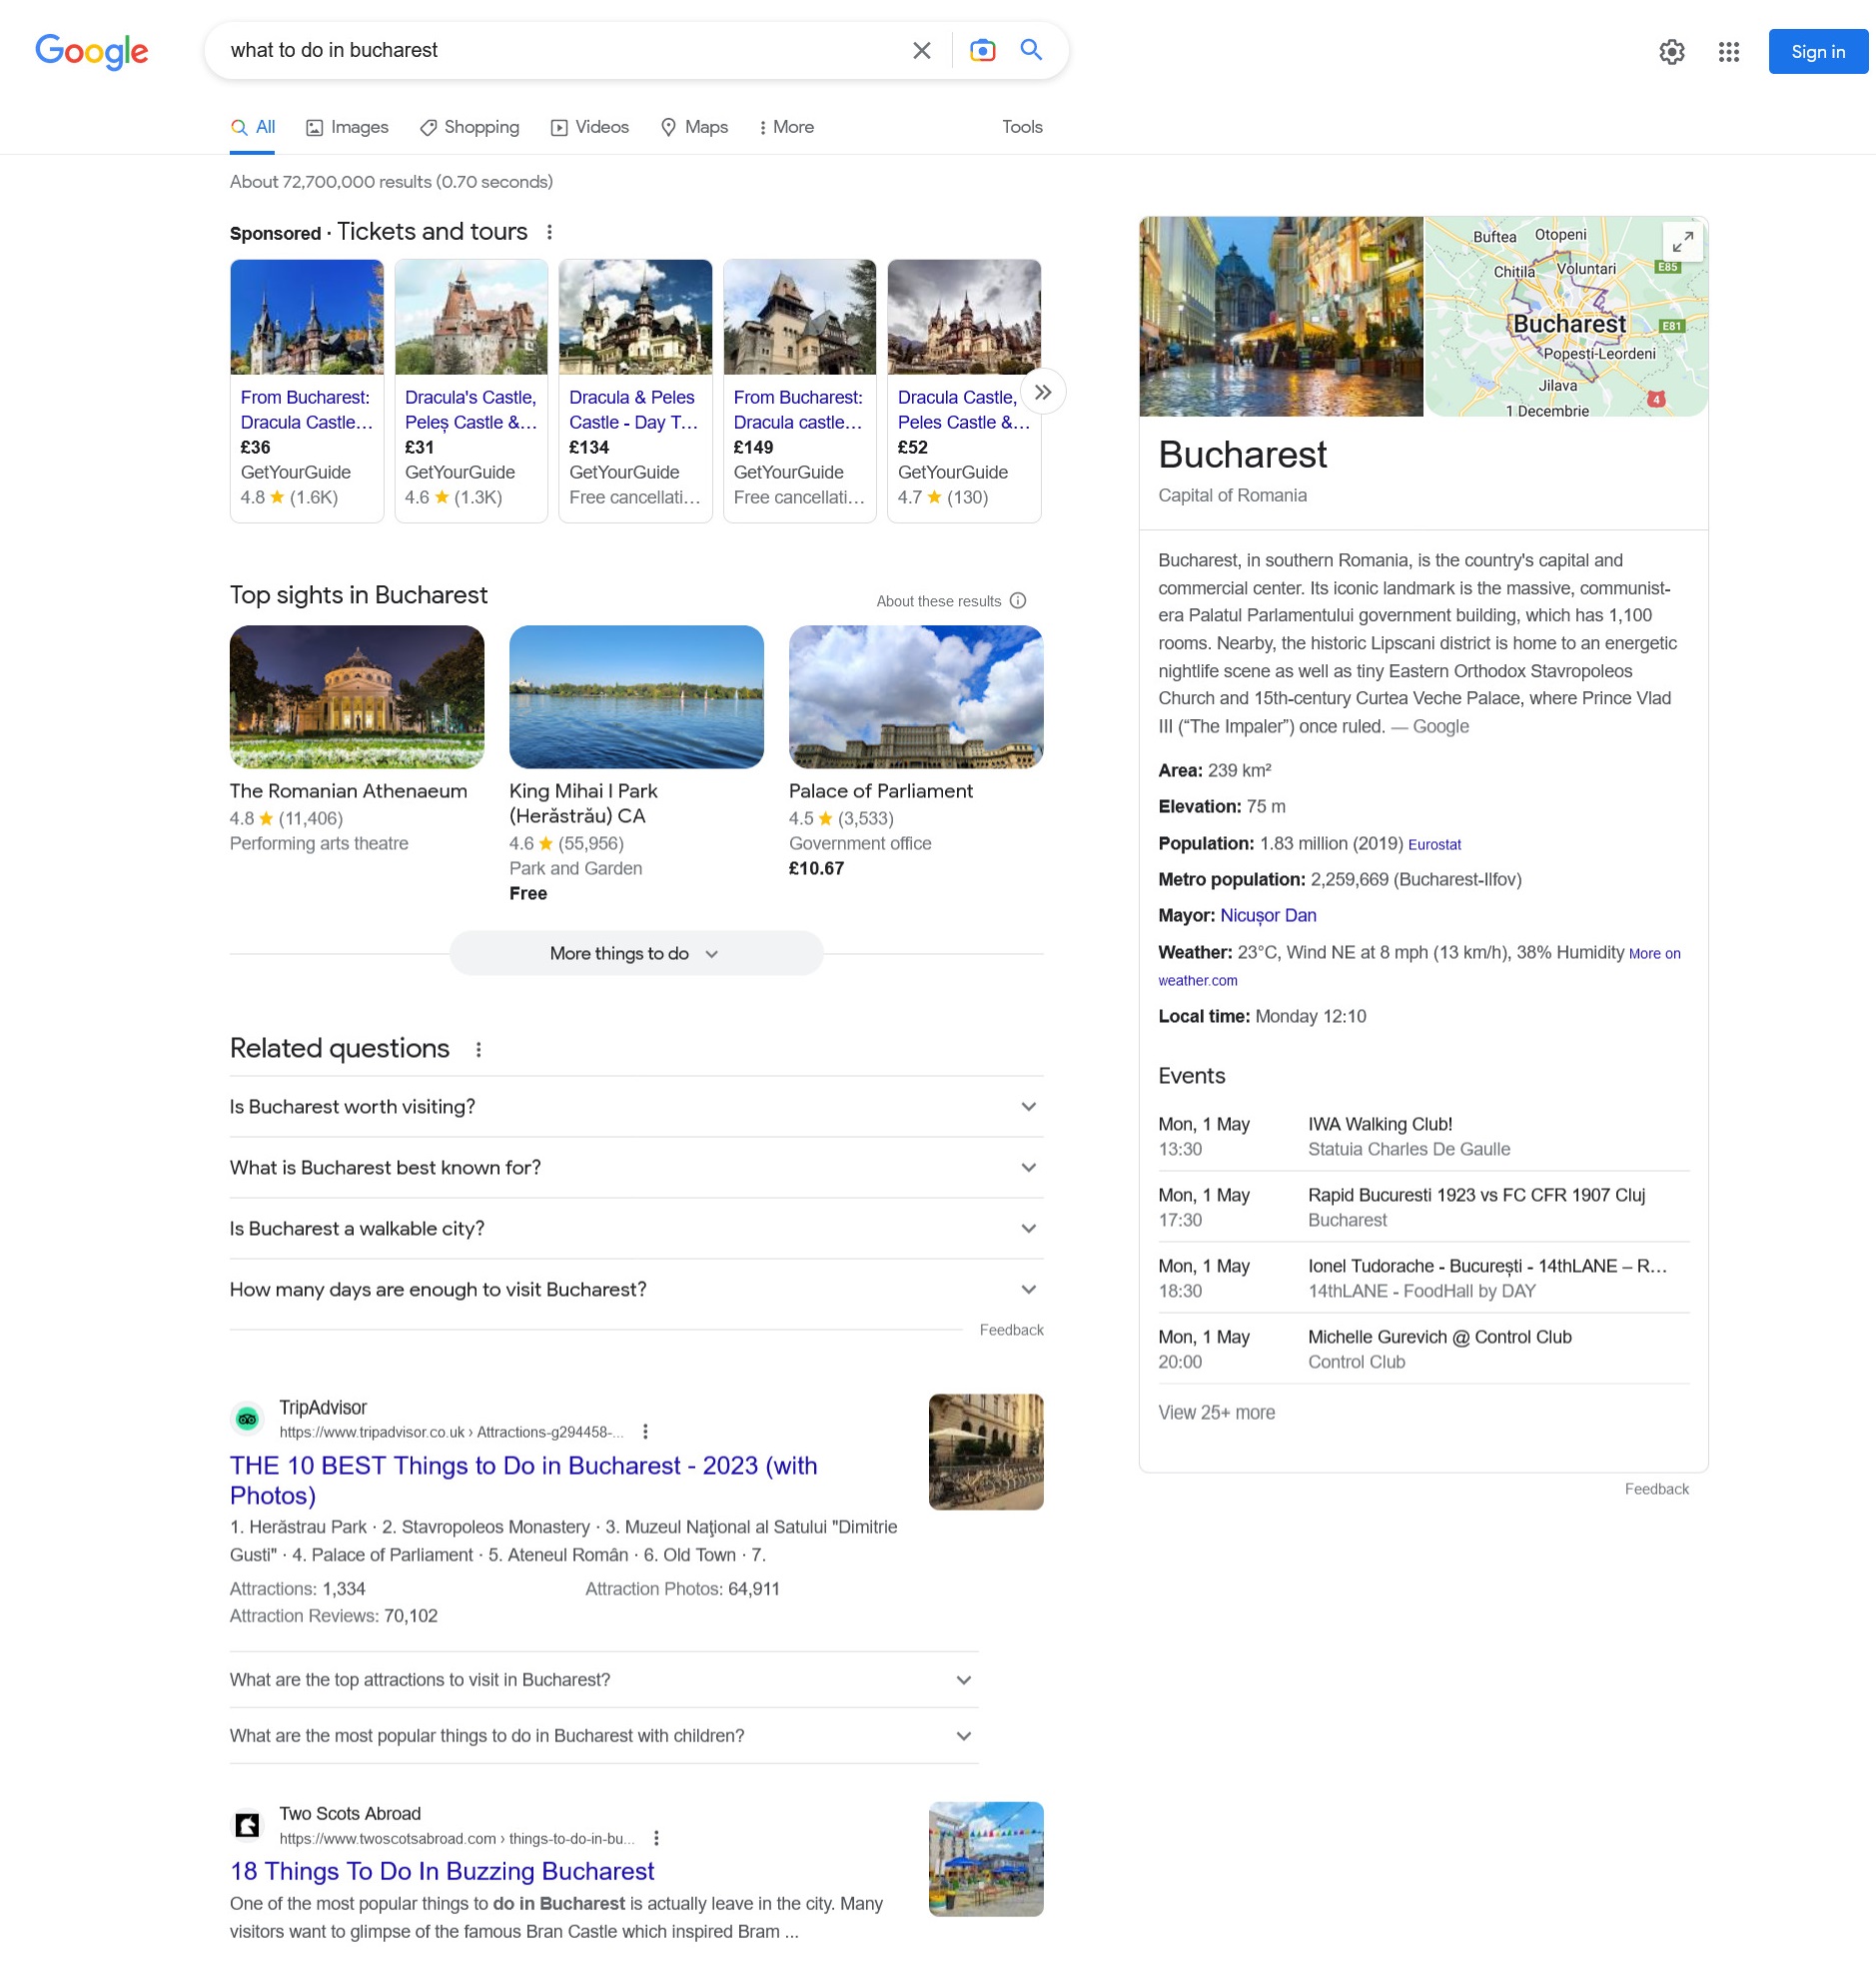 Google search with "what to do in Bucharest" showing how irrelevant the results are for a Gen Z user